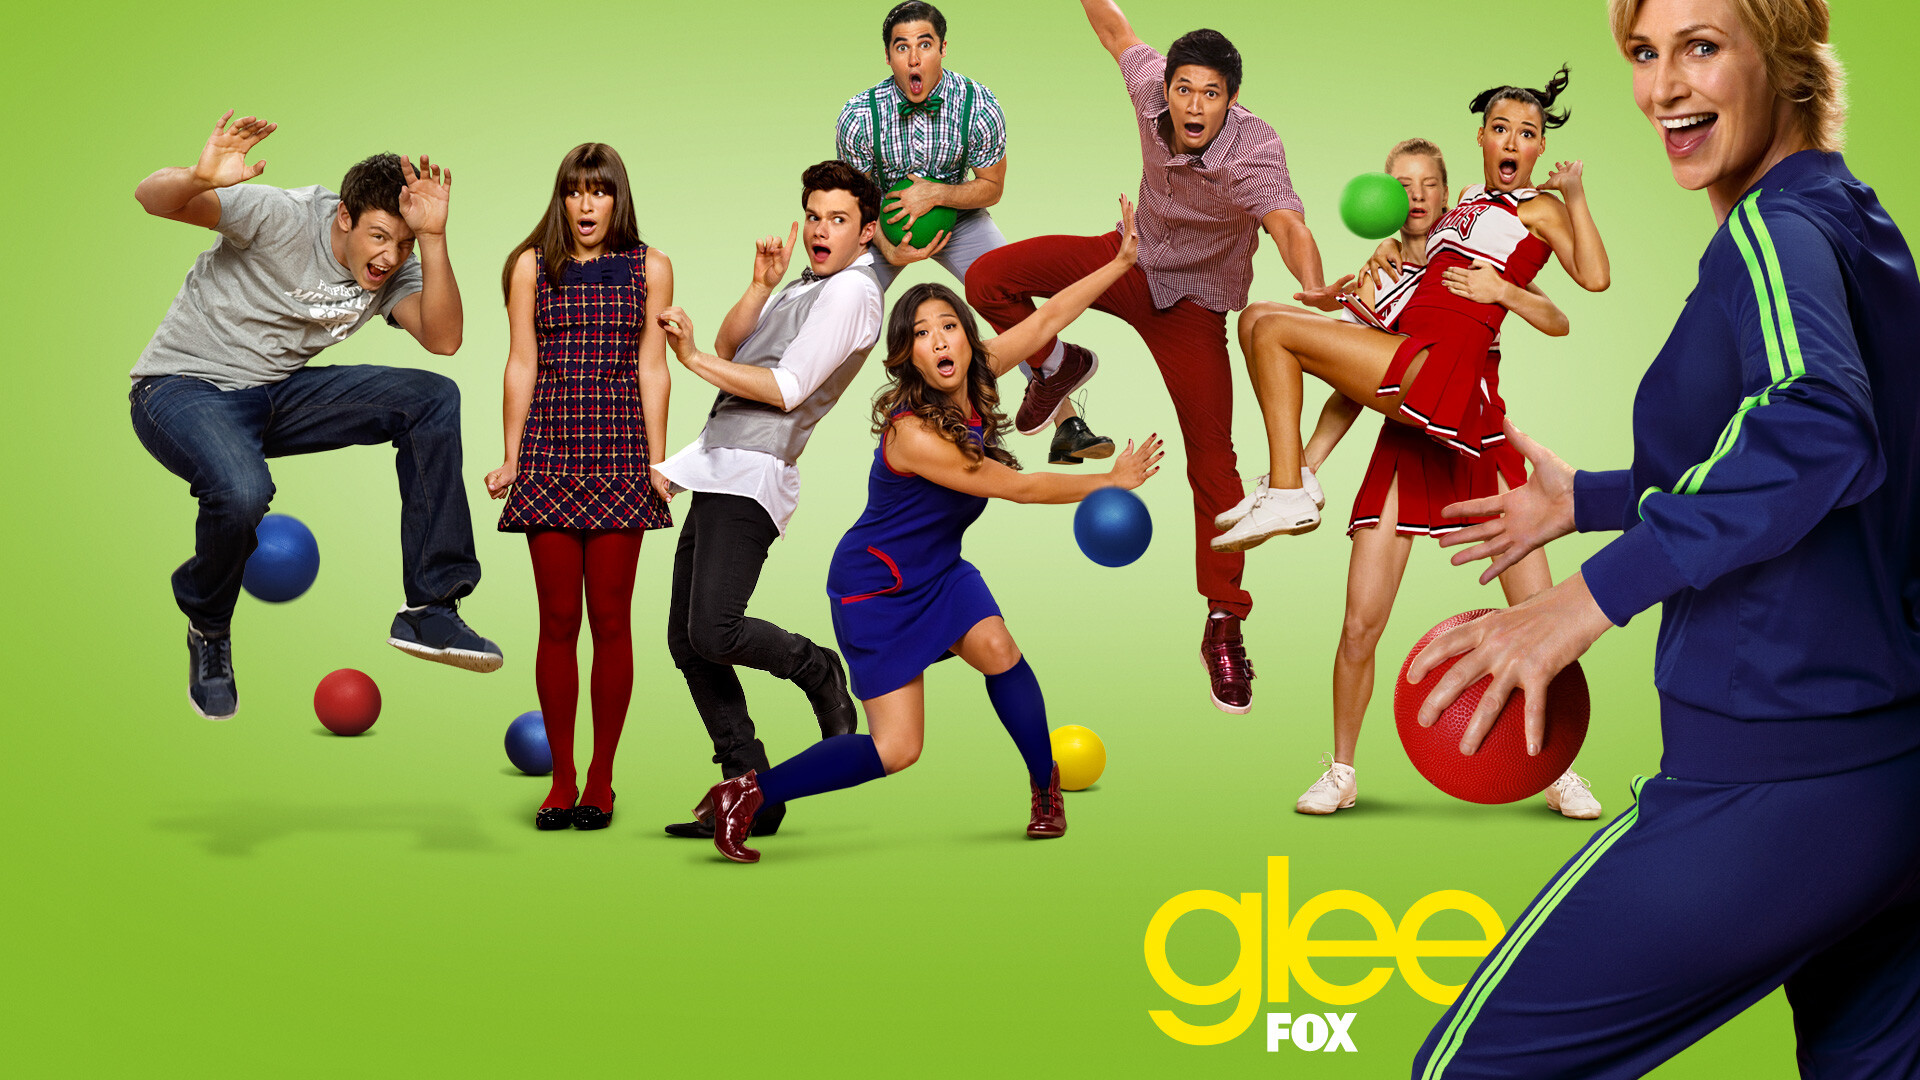 Glee (TV series): An American show telling about the choir group from the fictional William McKinley High School. 1920x1080 Full HD Background.